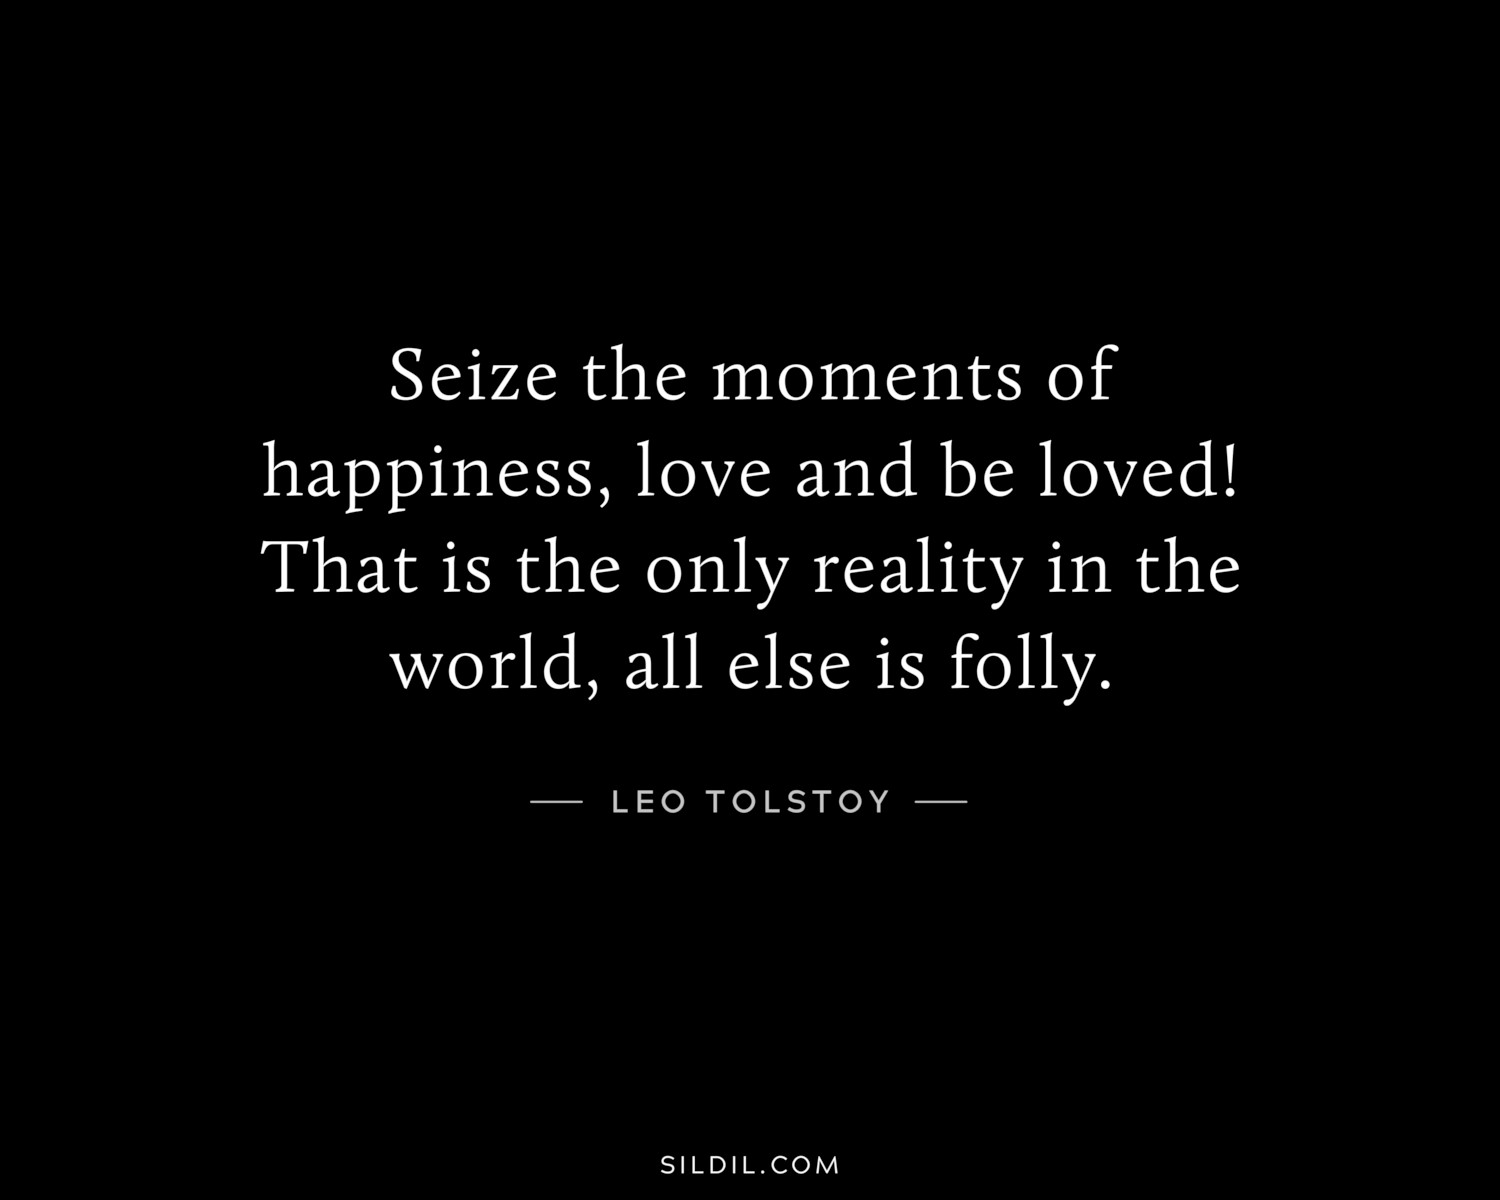 Seize the moments of happiness, love and be loved! That is the only reality in the world, all else is folly.